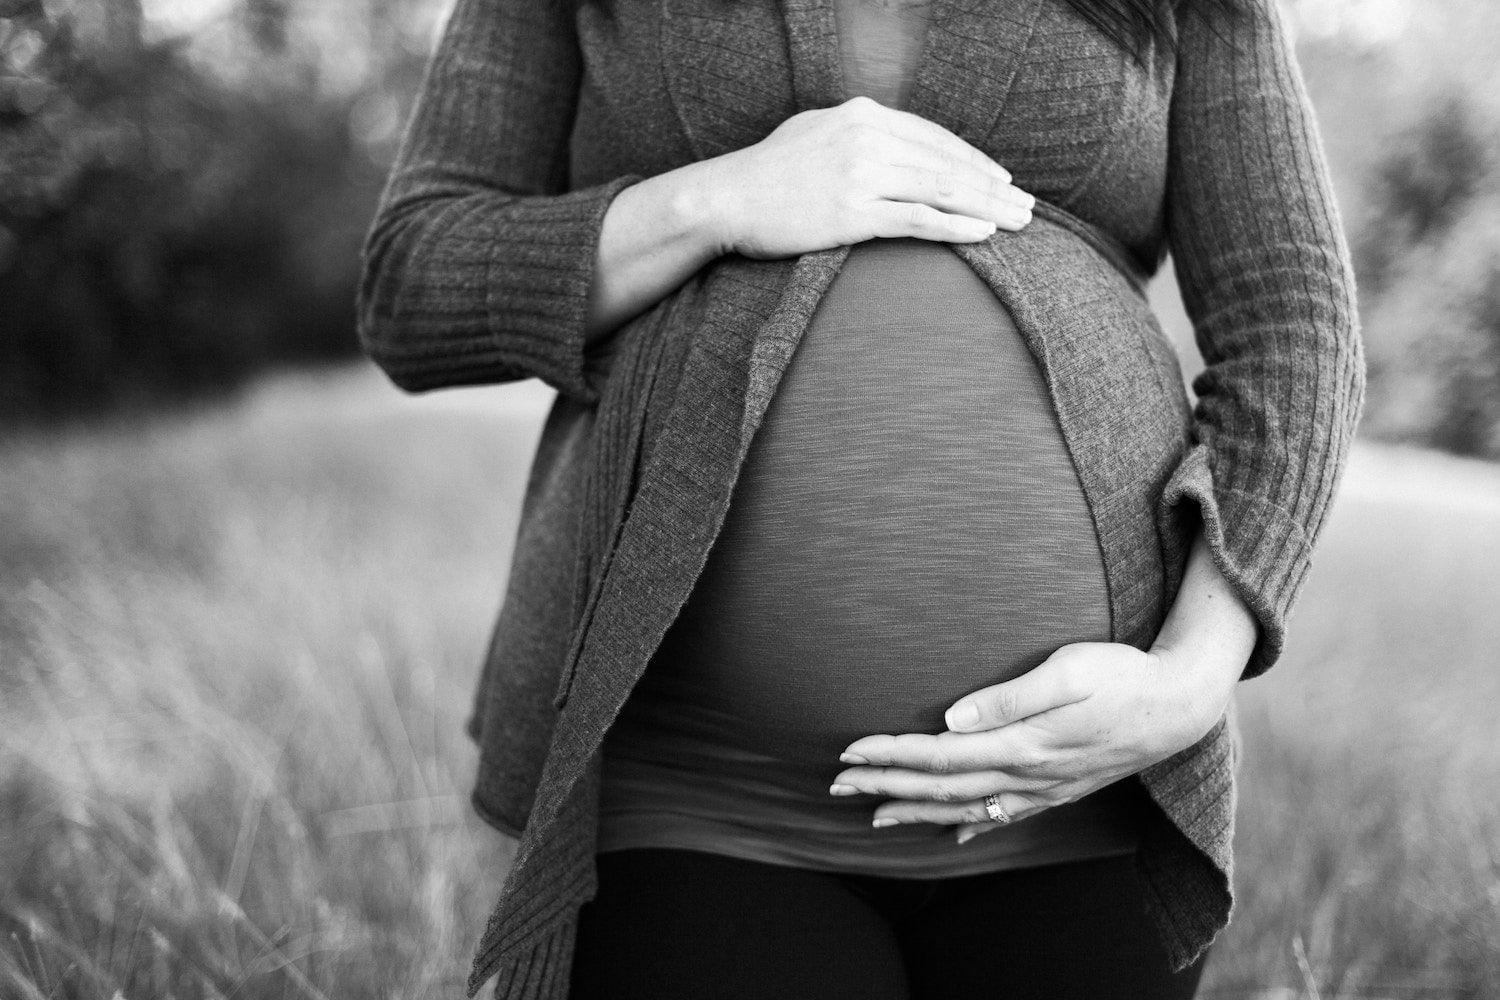 Resentment, Anxiety and Depression Key Factors in Poor Maternal Mental Health